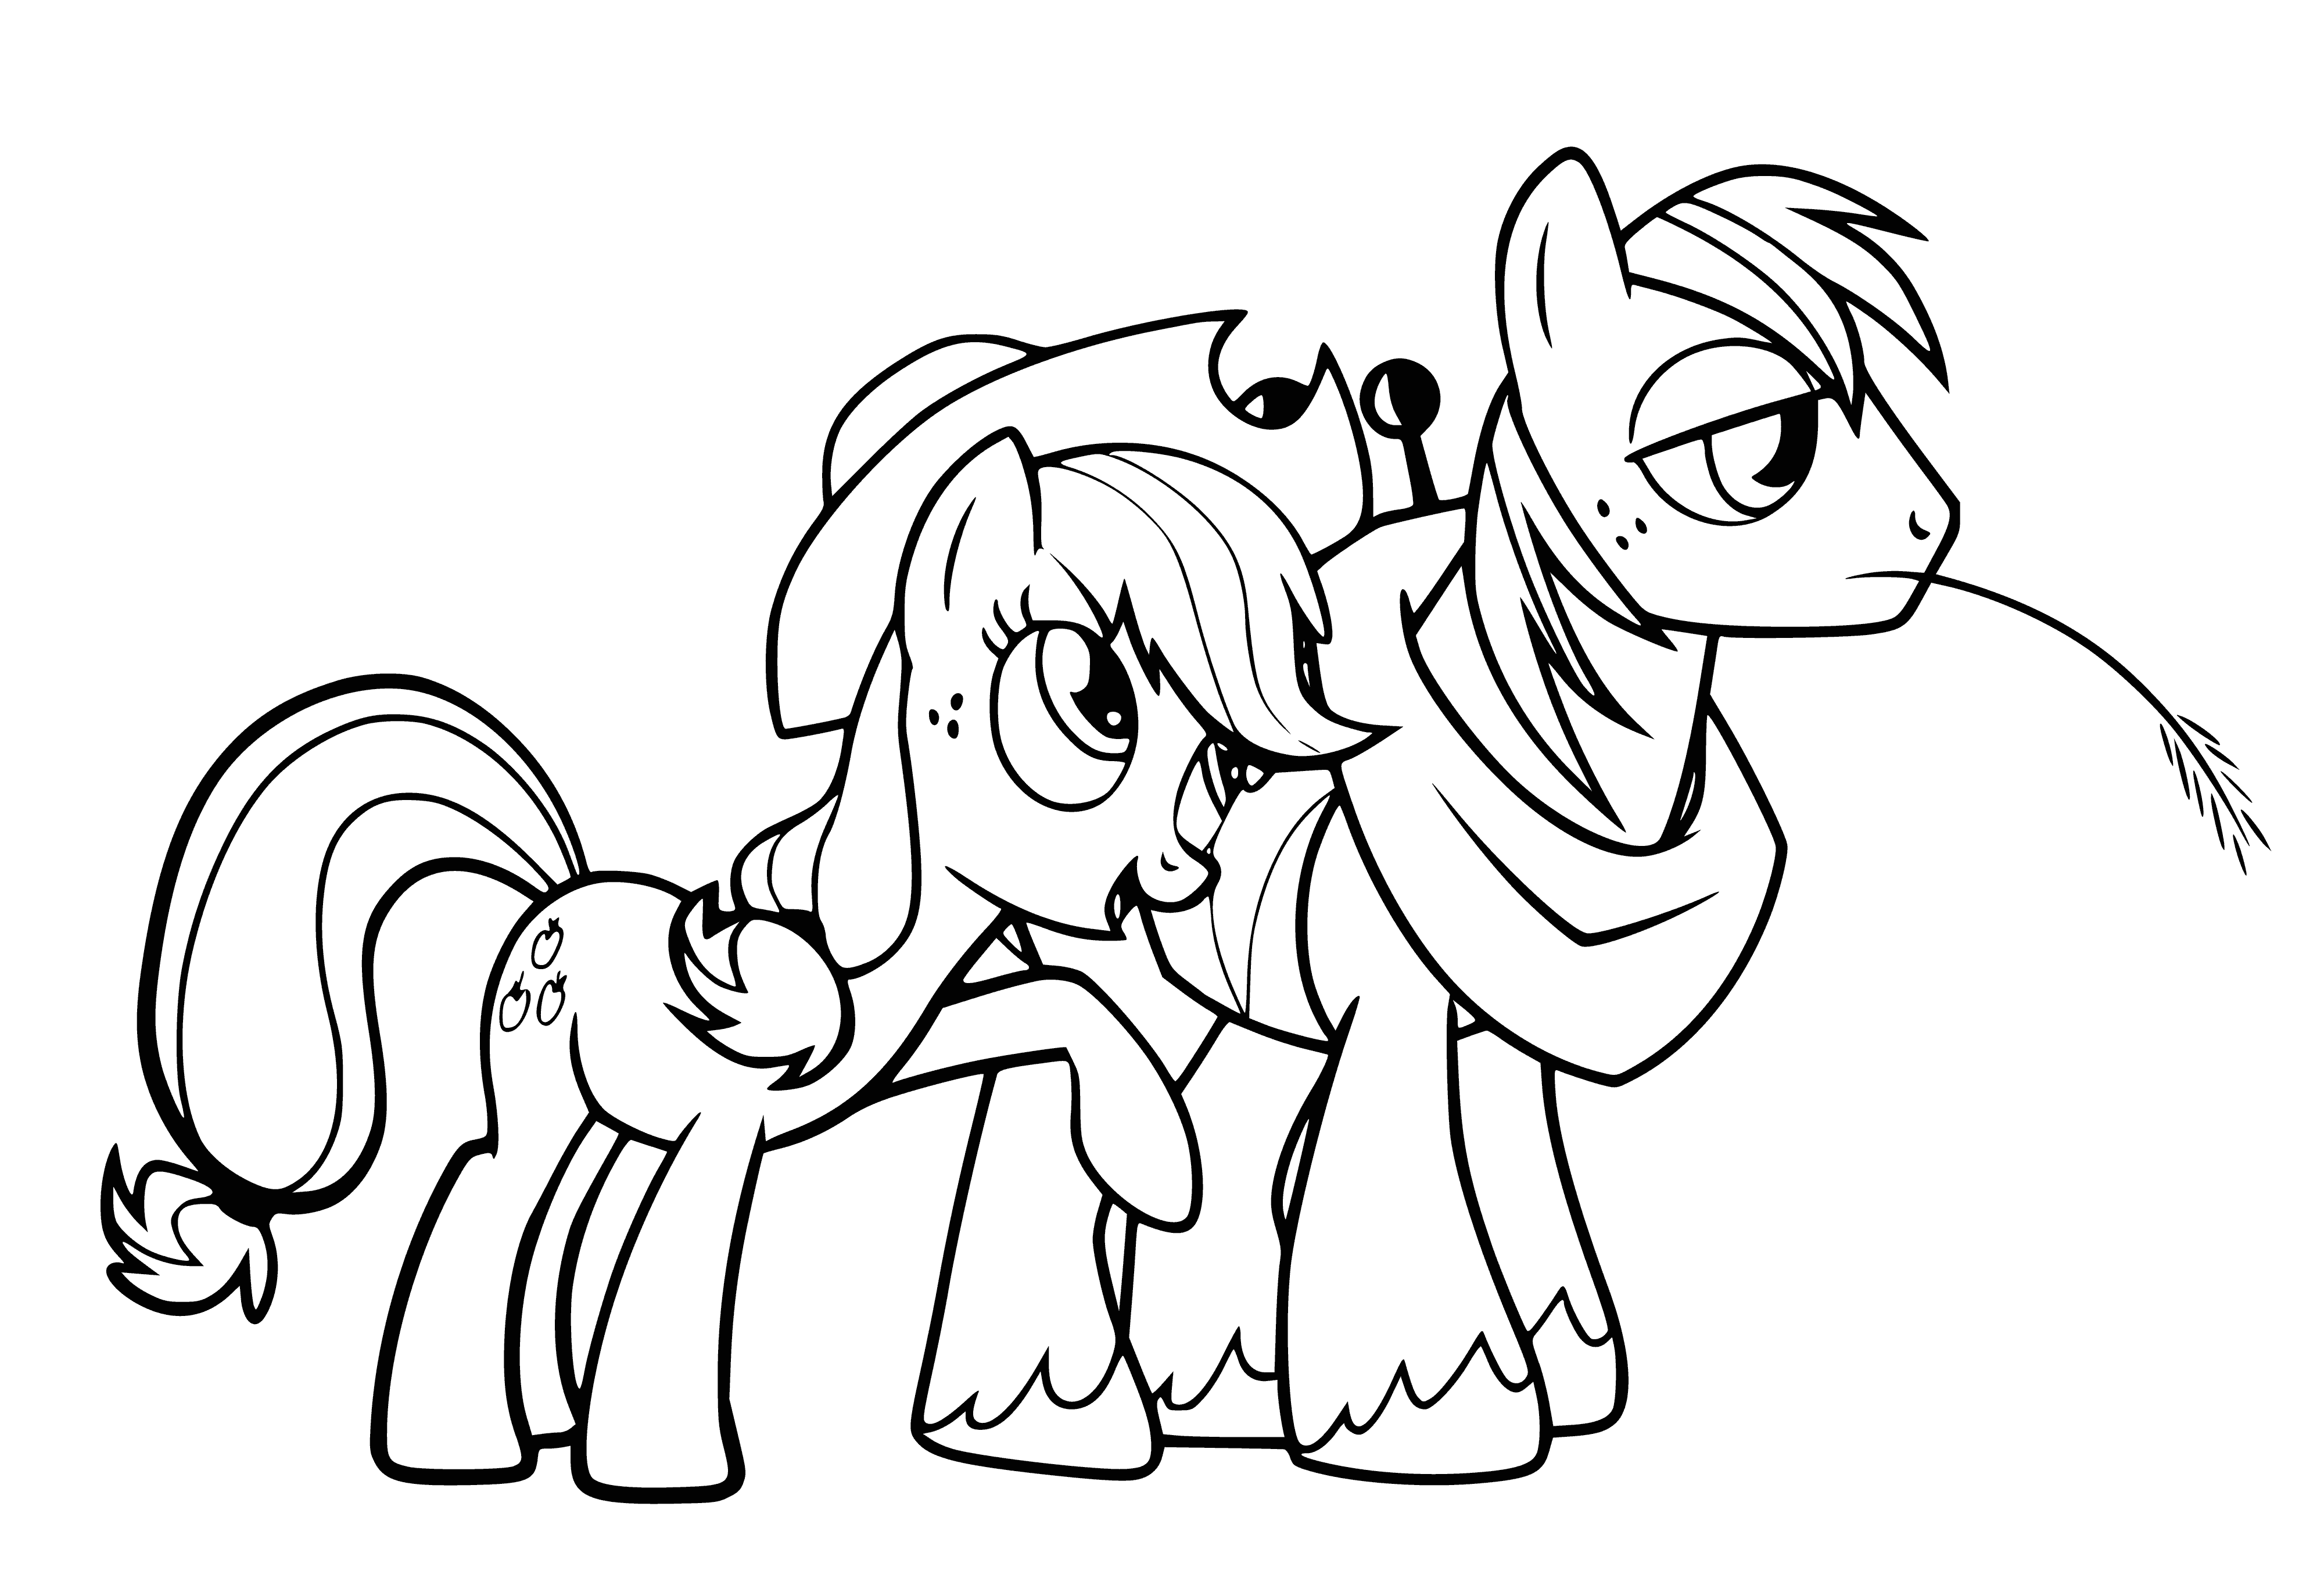 coloring page: Applejack & Big Mac stand in green field, both orange & red horses w/ brown manes; trees in background.